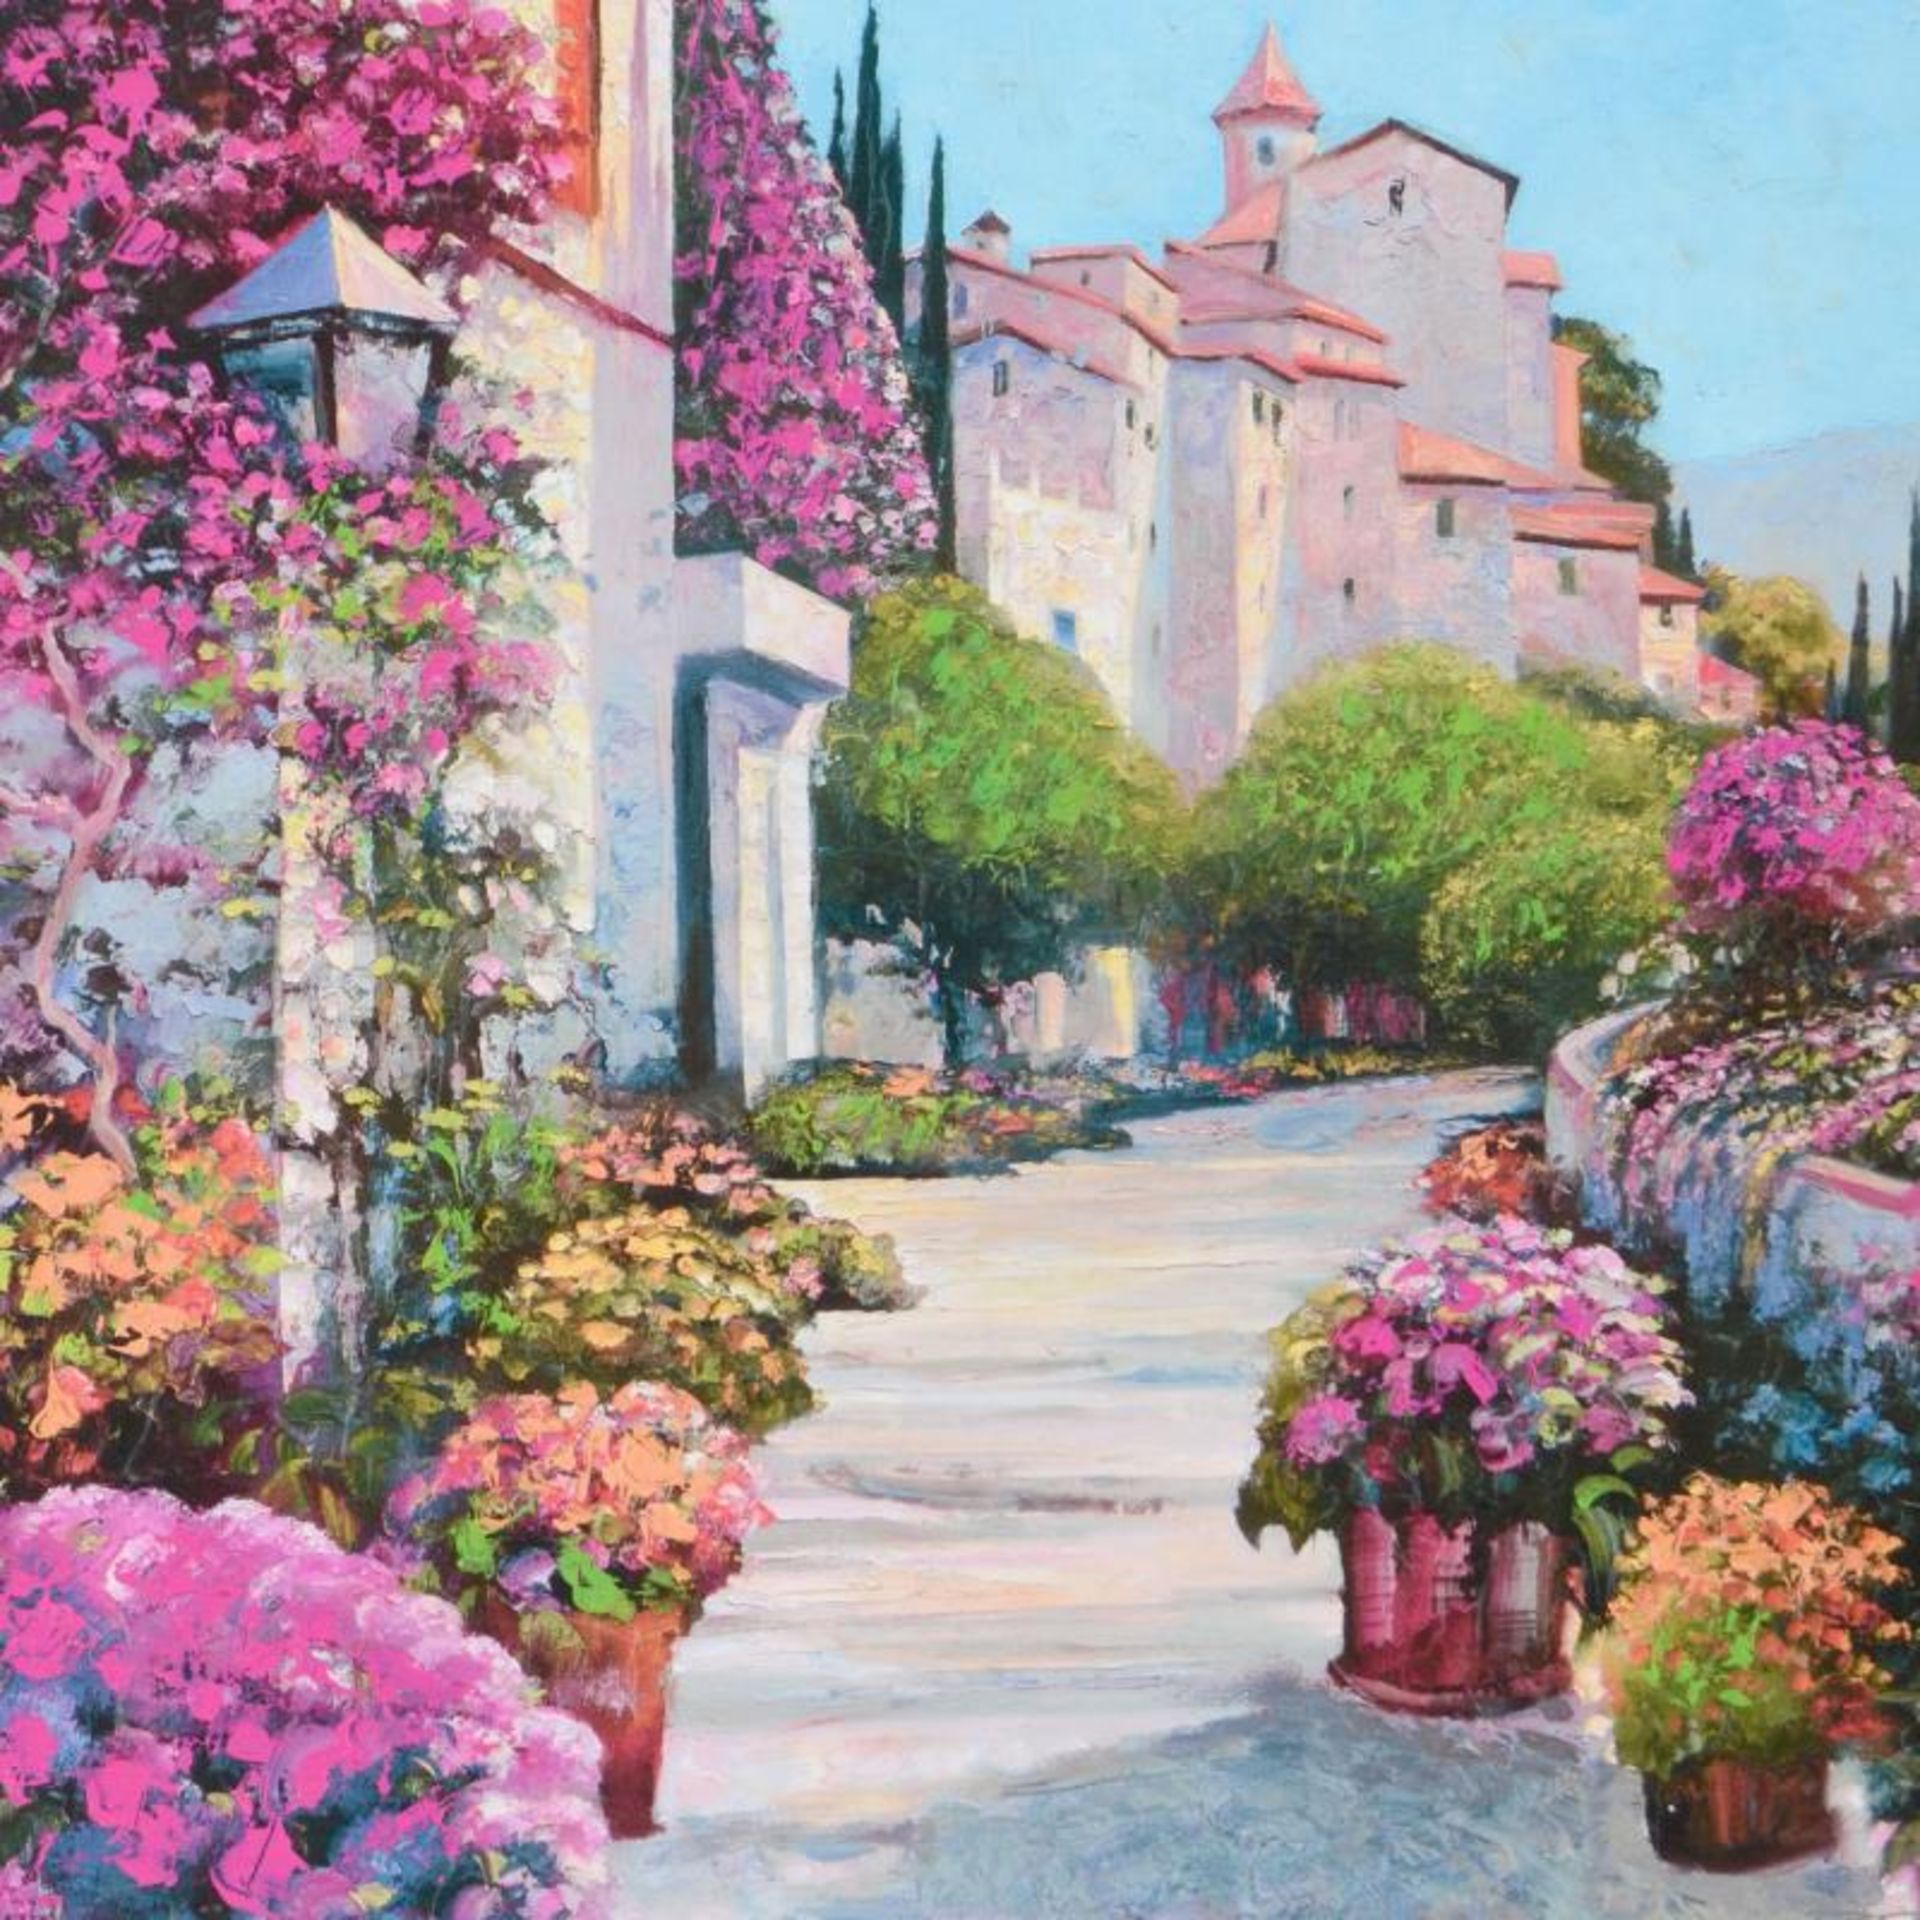 Howard Behrens (1933-2014), "Blissful Burgundy" Limited Edition on Canvas, Numbe - Image 2 of 2